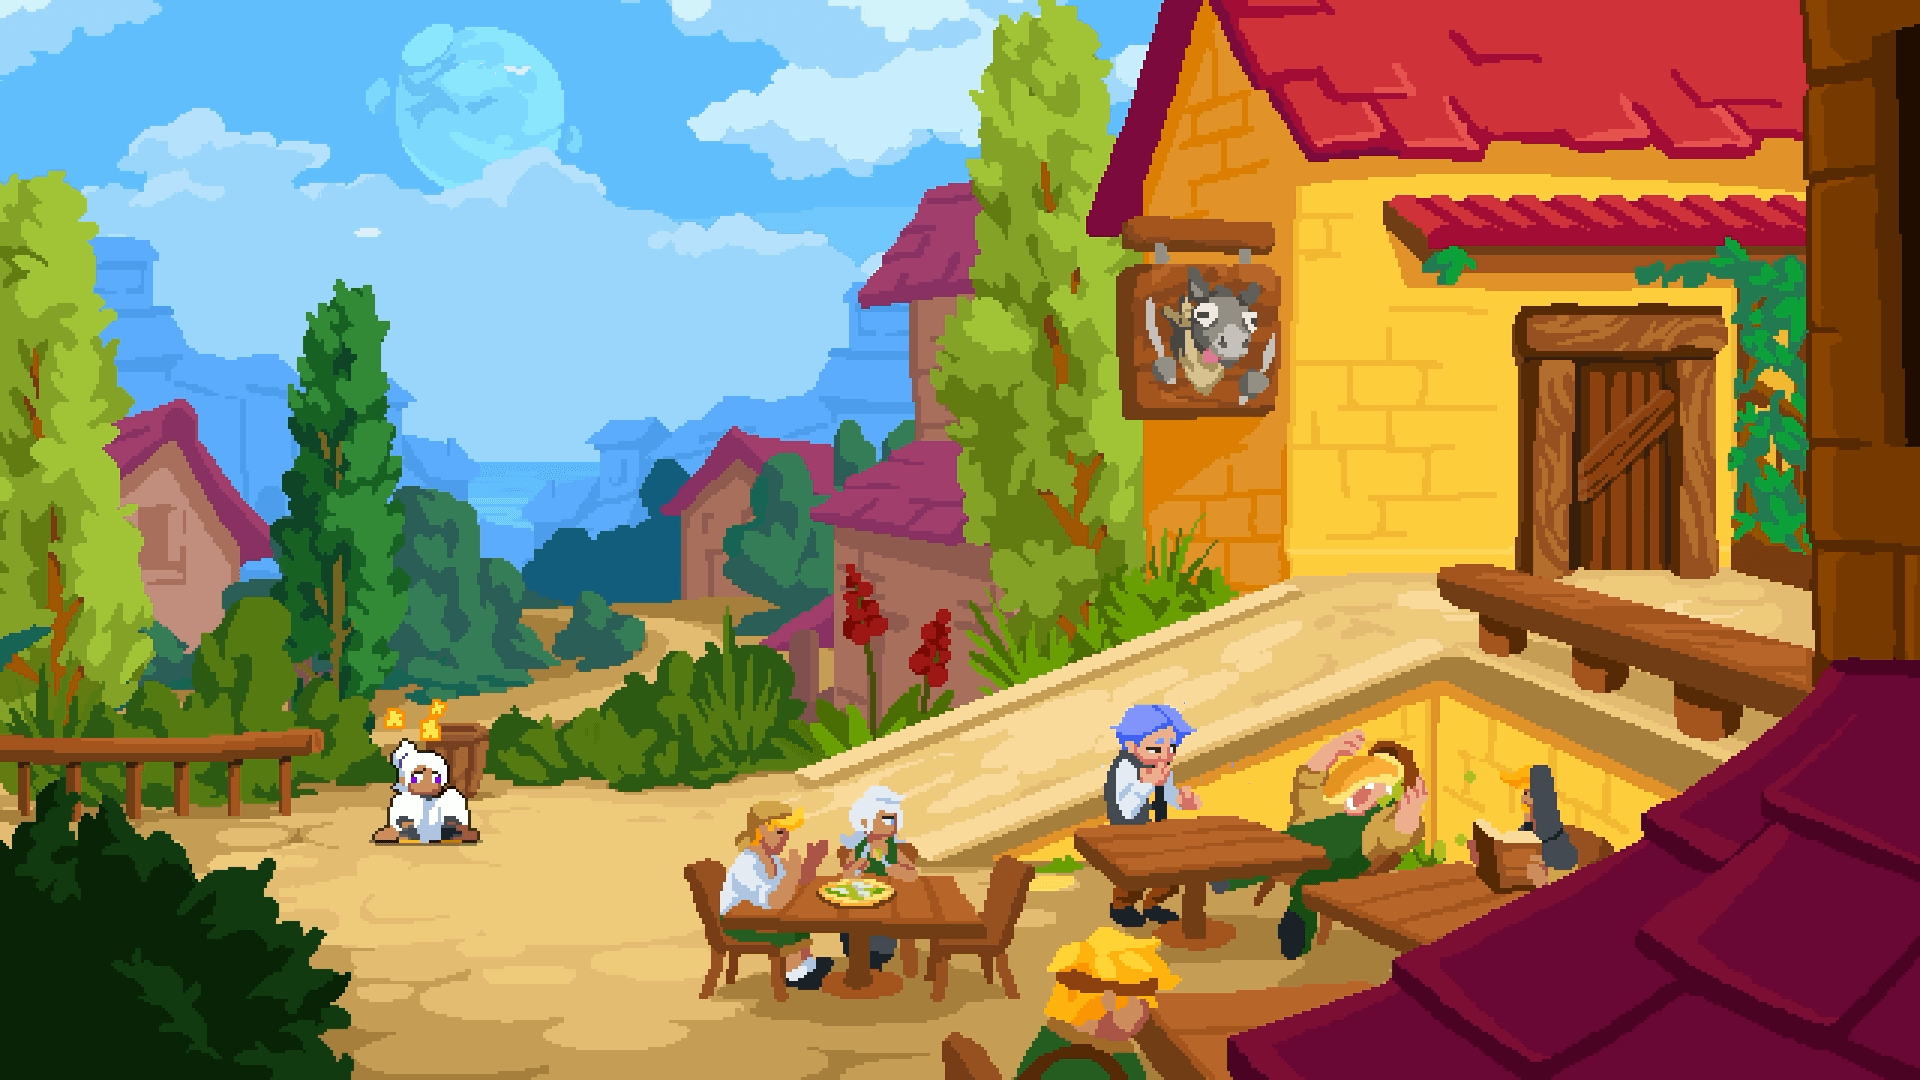 pixelart scene from new game Nanuka inspired by the Sicilian landscape with characters going about their daily lives 